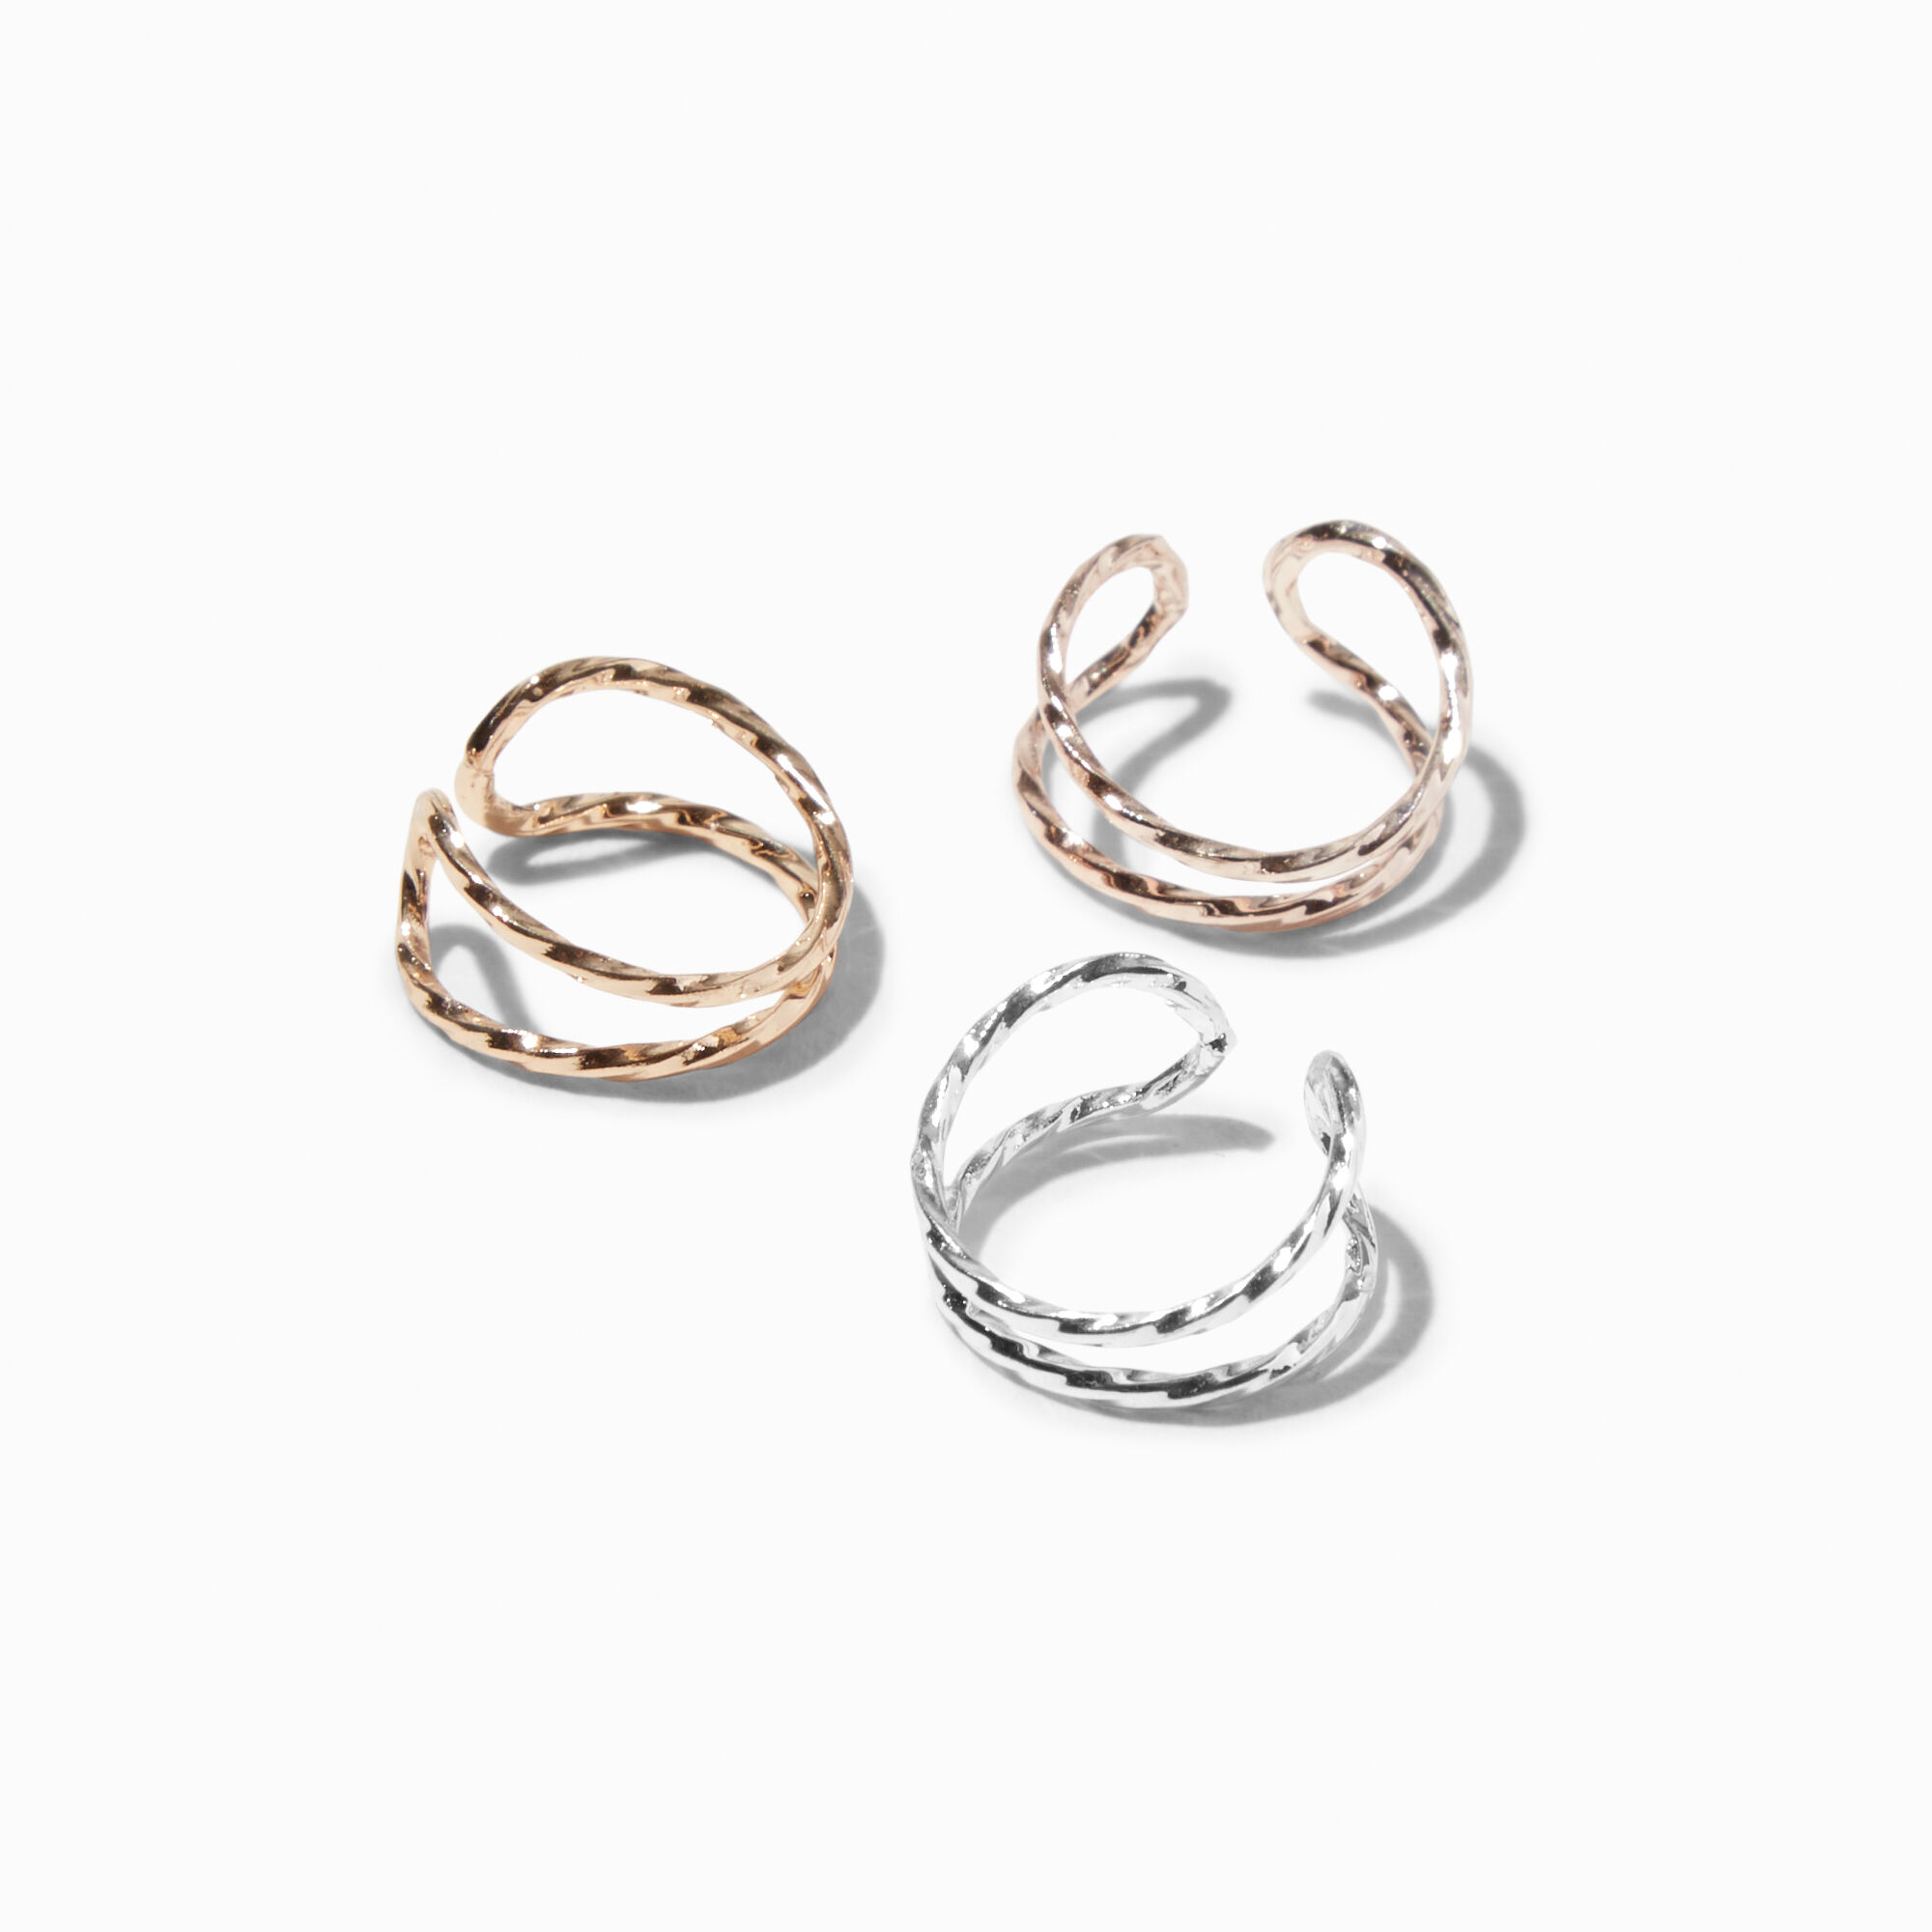 View Claires Mixed Metal Twisted Hammered Ear Cuff 3 Pack Rose Gold information